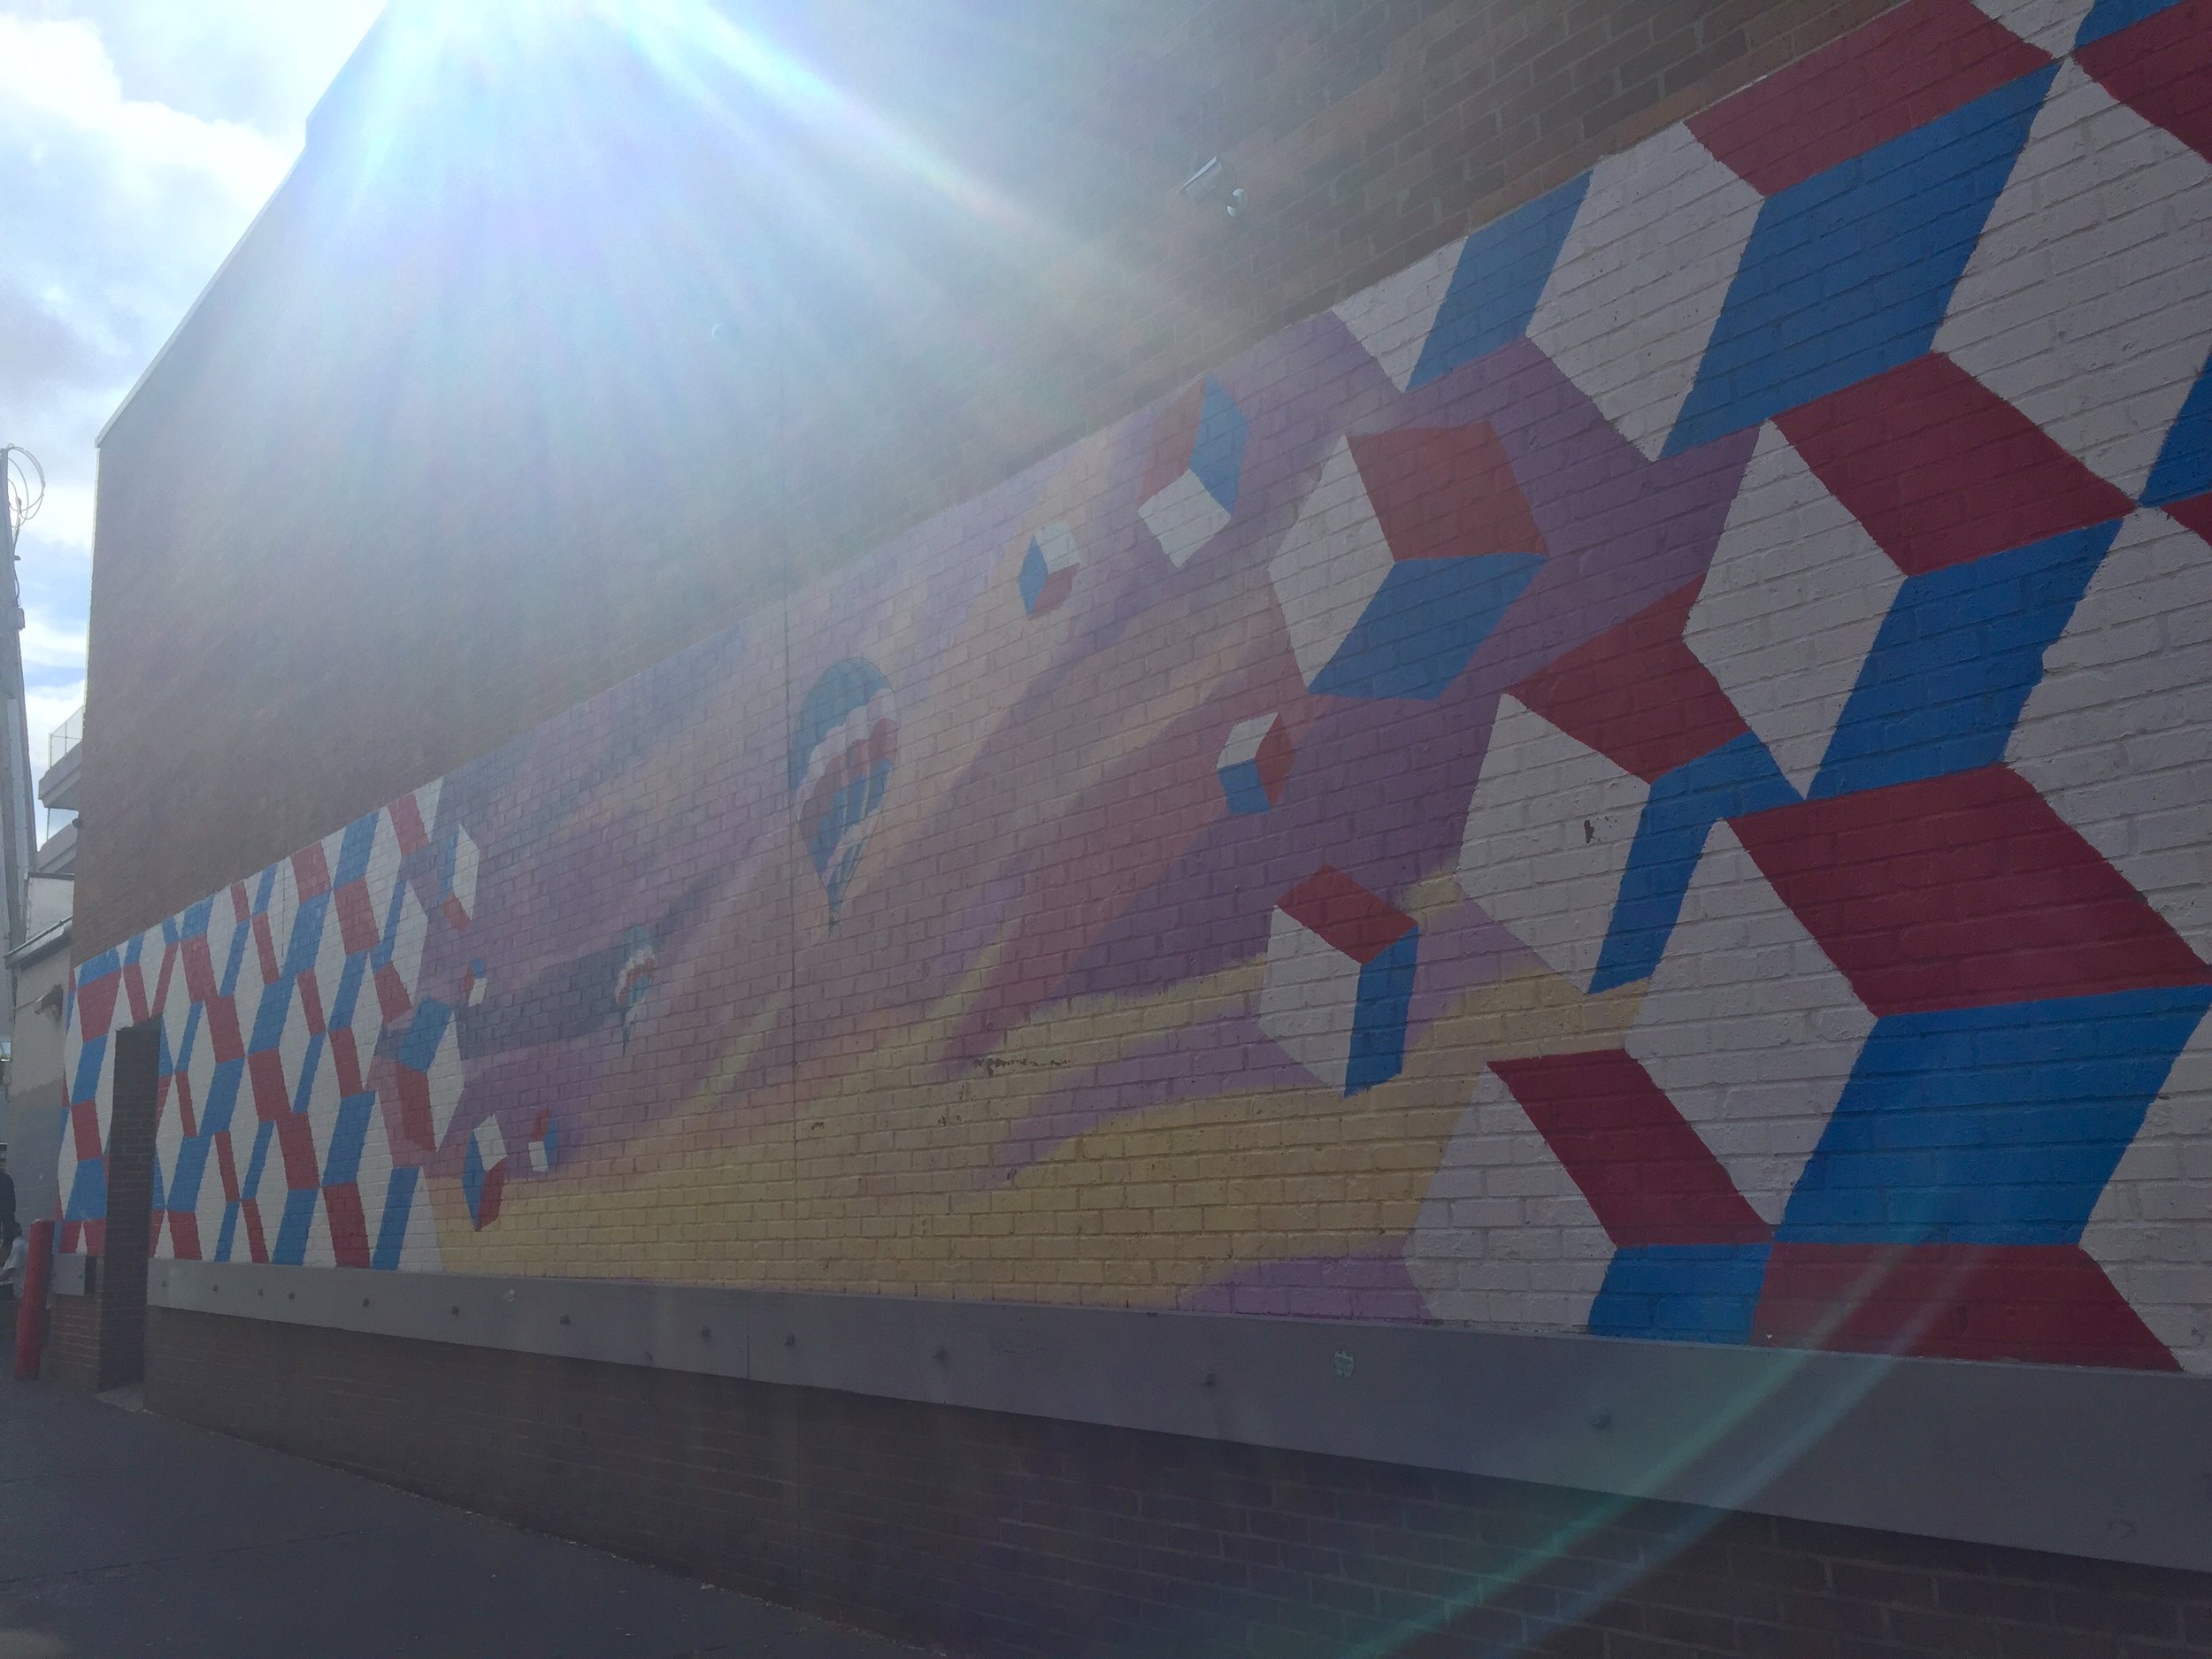 2. Balloons: When looking at the Bookstore Mural it is easy to miss this mural down the alley just to the right. It depicts hot air balloons rising through a geometric design. Add a little sun flare and the shot is just golden.